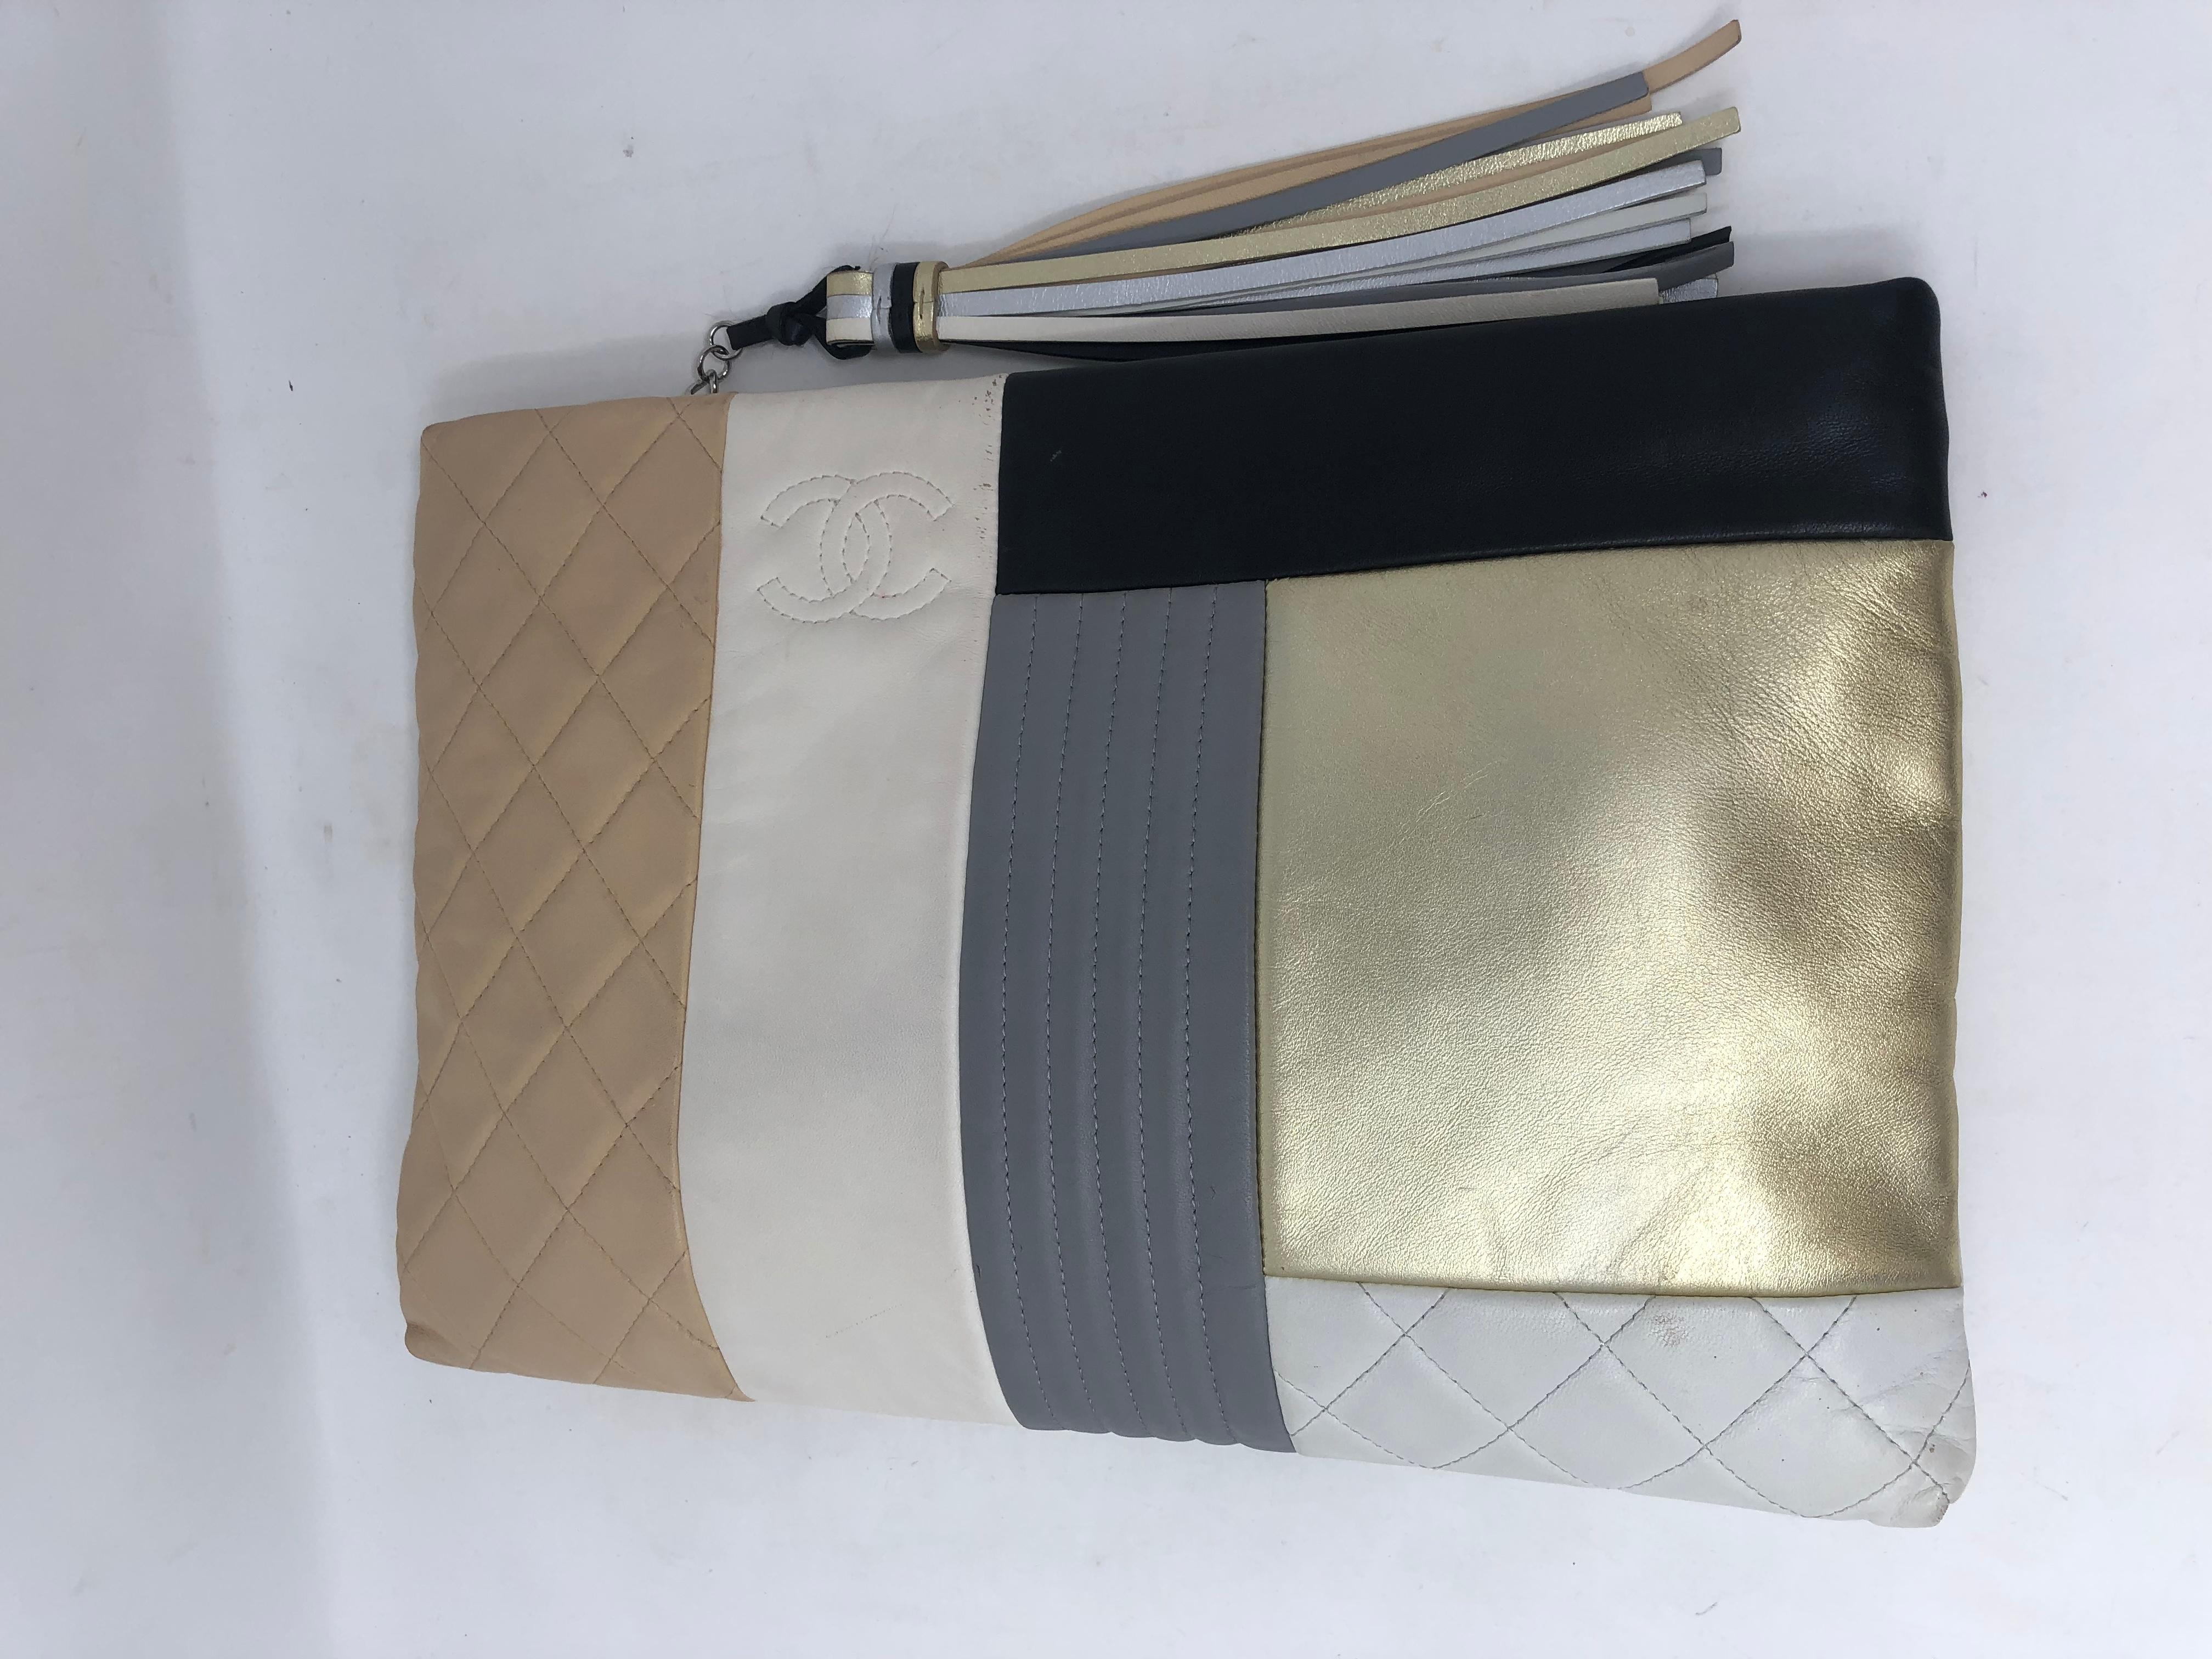 Chanel Patchwork Clutch with Tassel. Silver metallic clutch with strips of leather woven through the bag. Multicolor clutch that is limited and unique. Has some wear but lots of life left. Guaranteed authentic. 